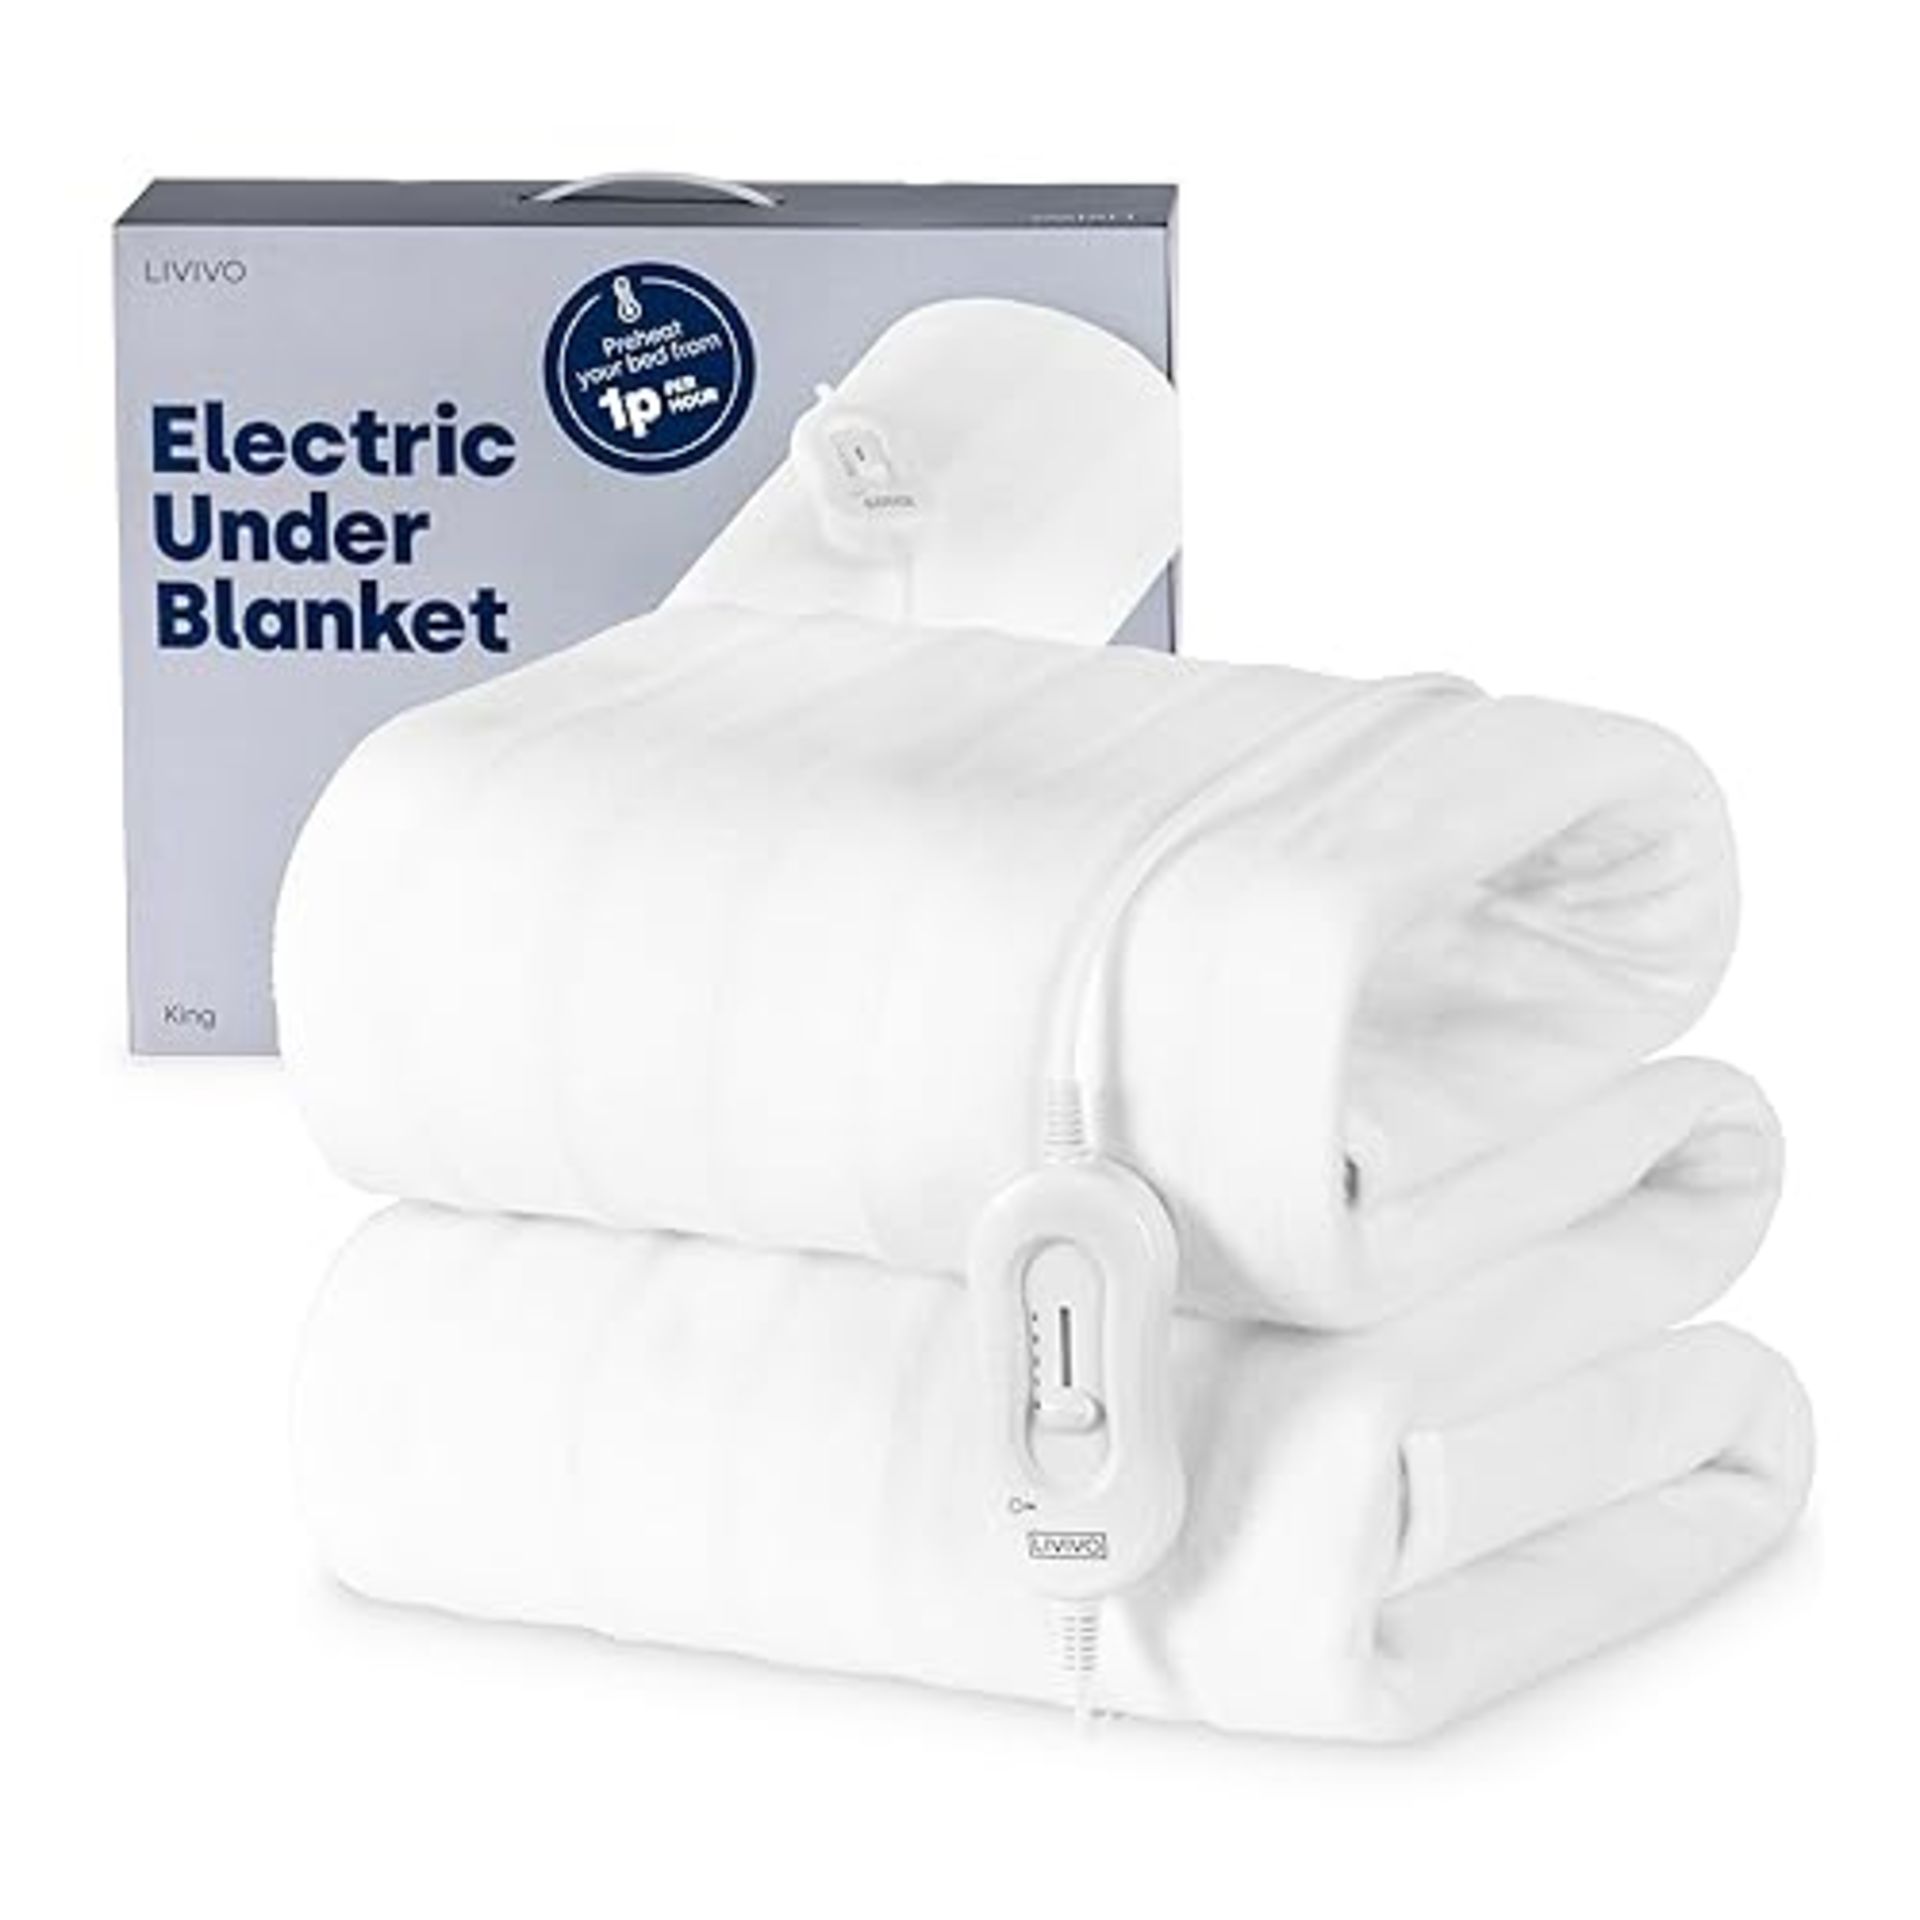 LIVIVO Electric Under Blanket - Heated Underblanket with 3 Heat Settings, Detachable Control, Ultra